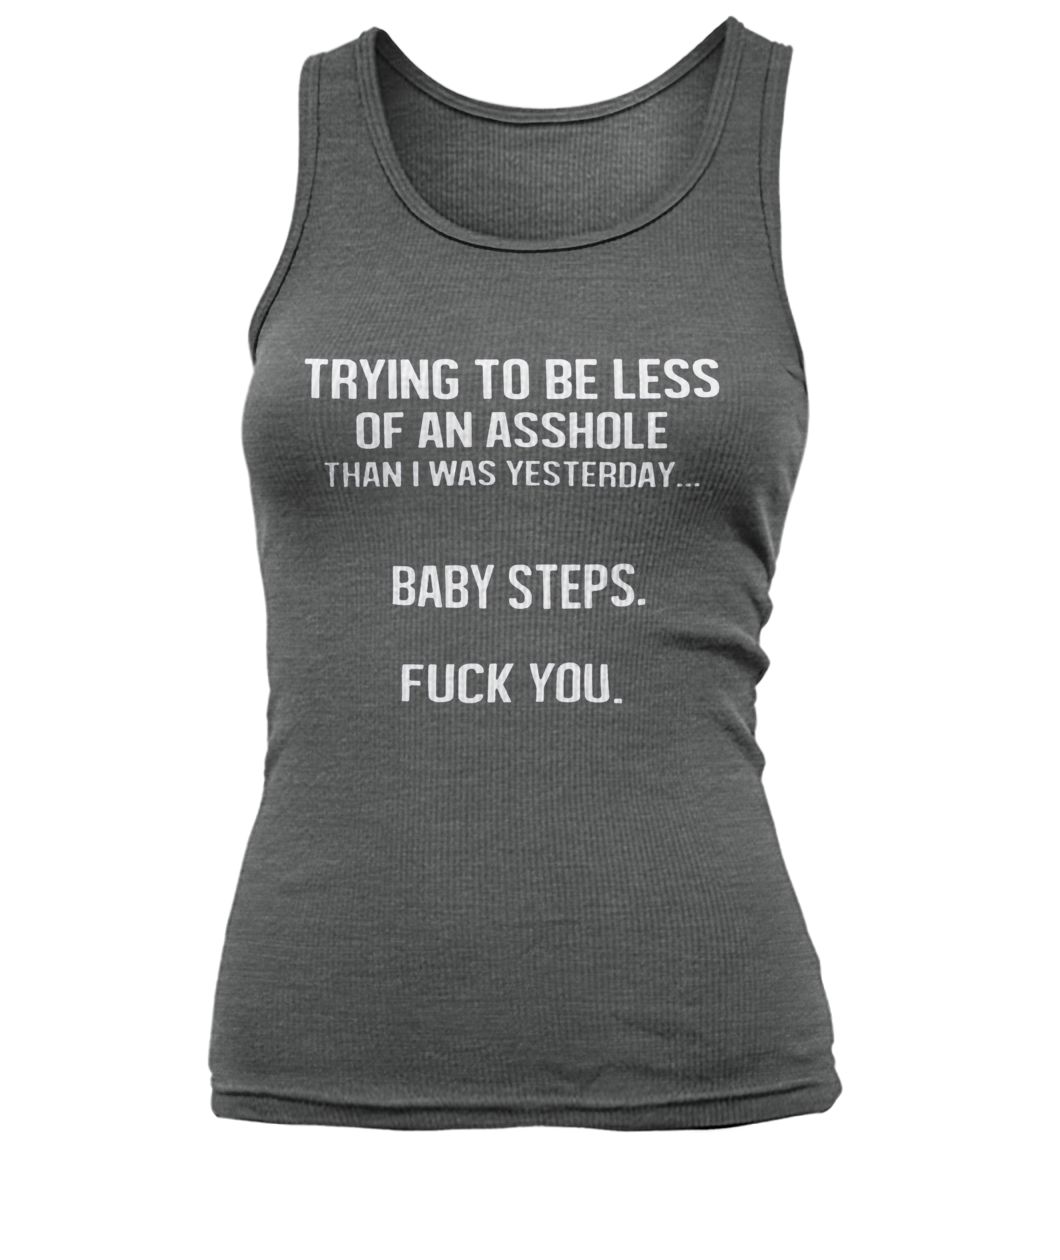 Trying to be less of an asshole than I was yesterday women's tank top